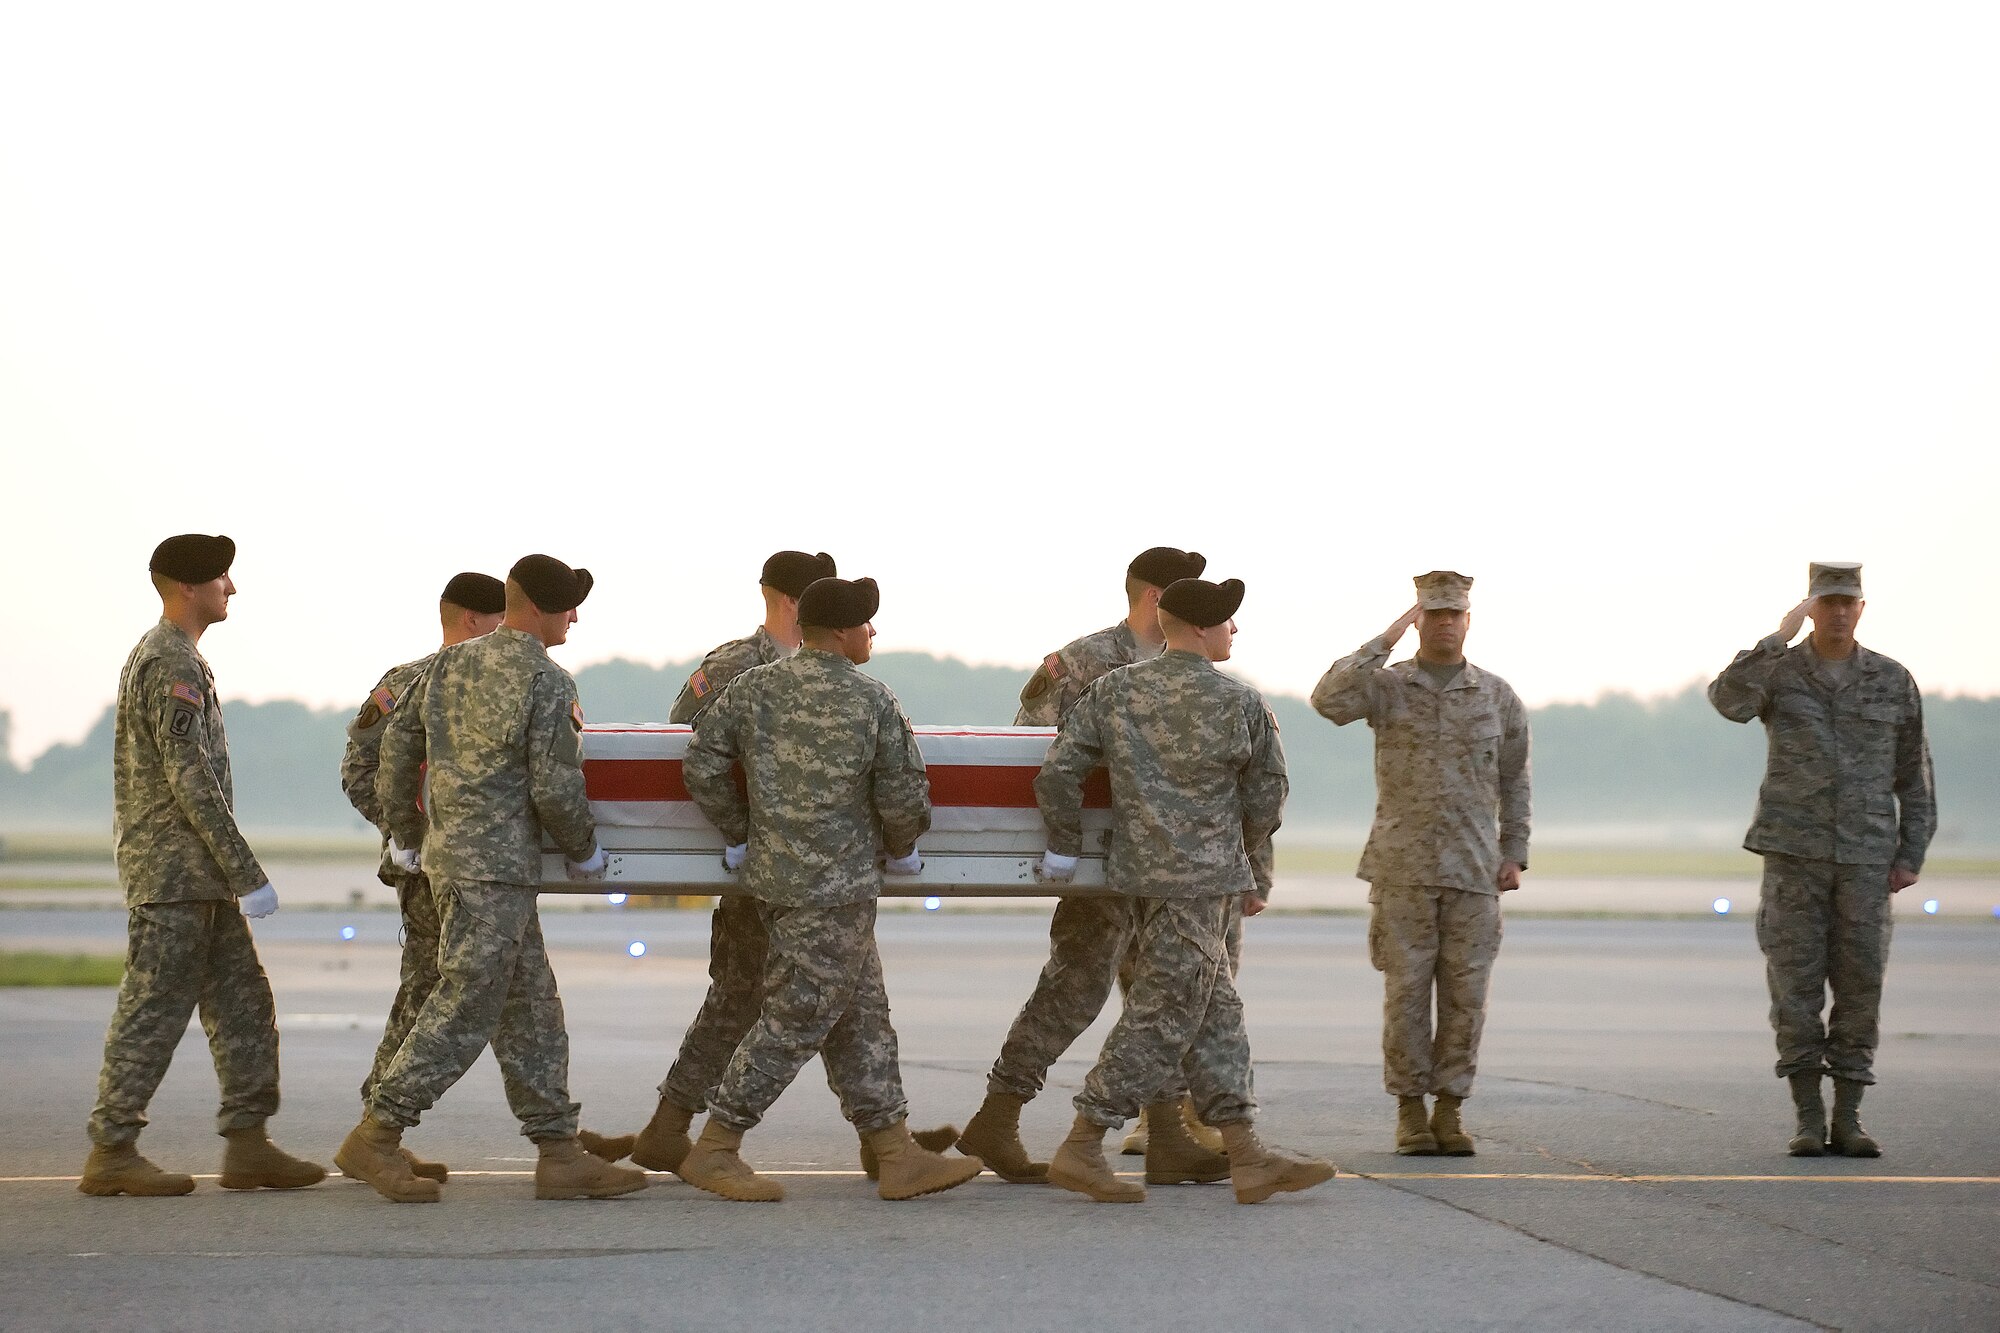 25 June 2010  USAF Photo by Jason Minto.  A U.S. Army carry team transfers the remains of Army 1SGT Eddie Turner of Ft. Belvoir, VA at Dover Air Force Base, Del., June 25, 2010.  